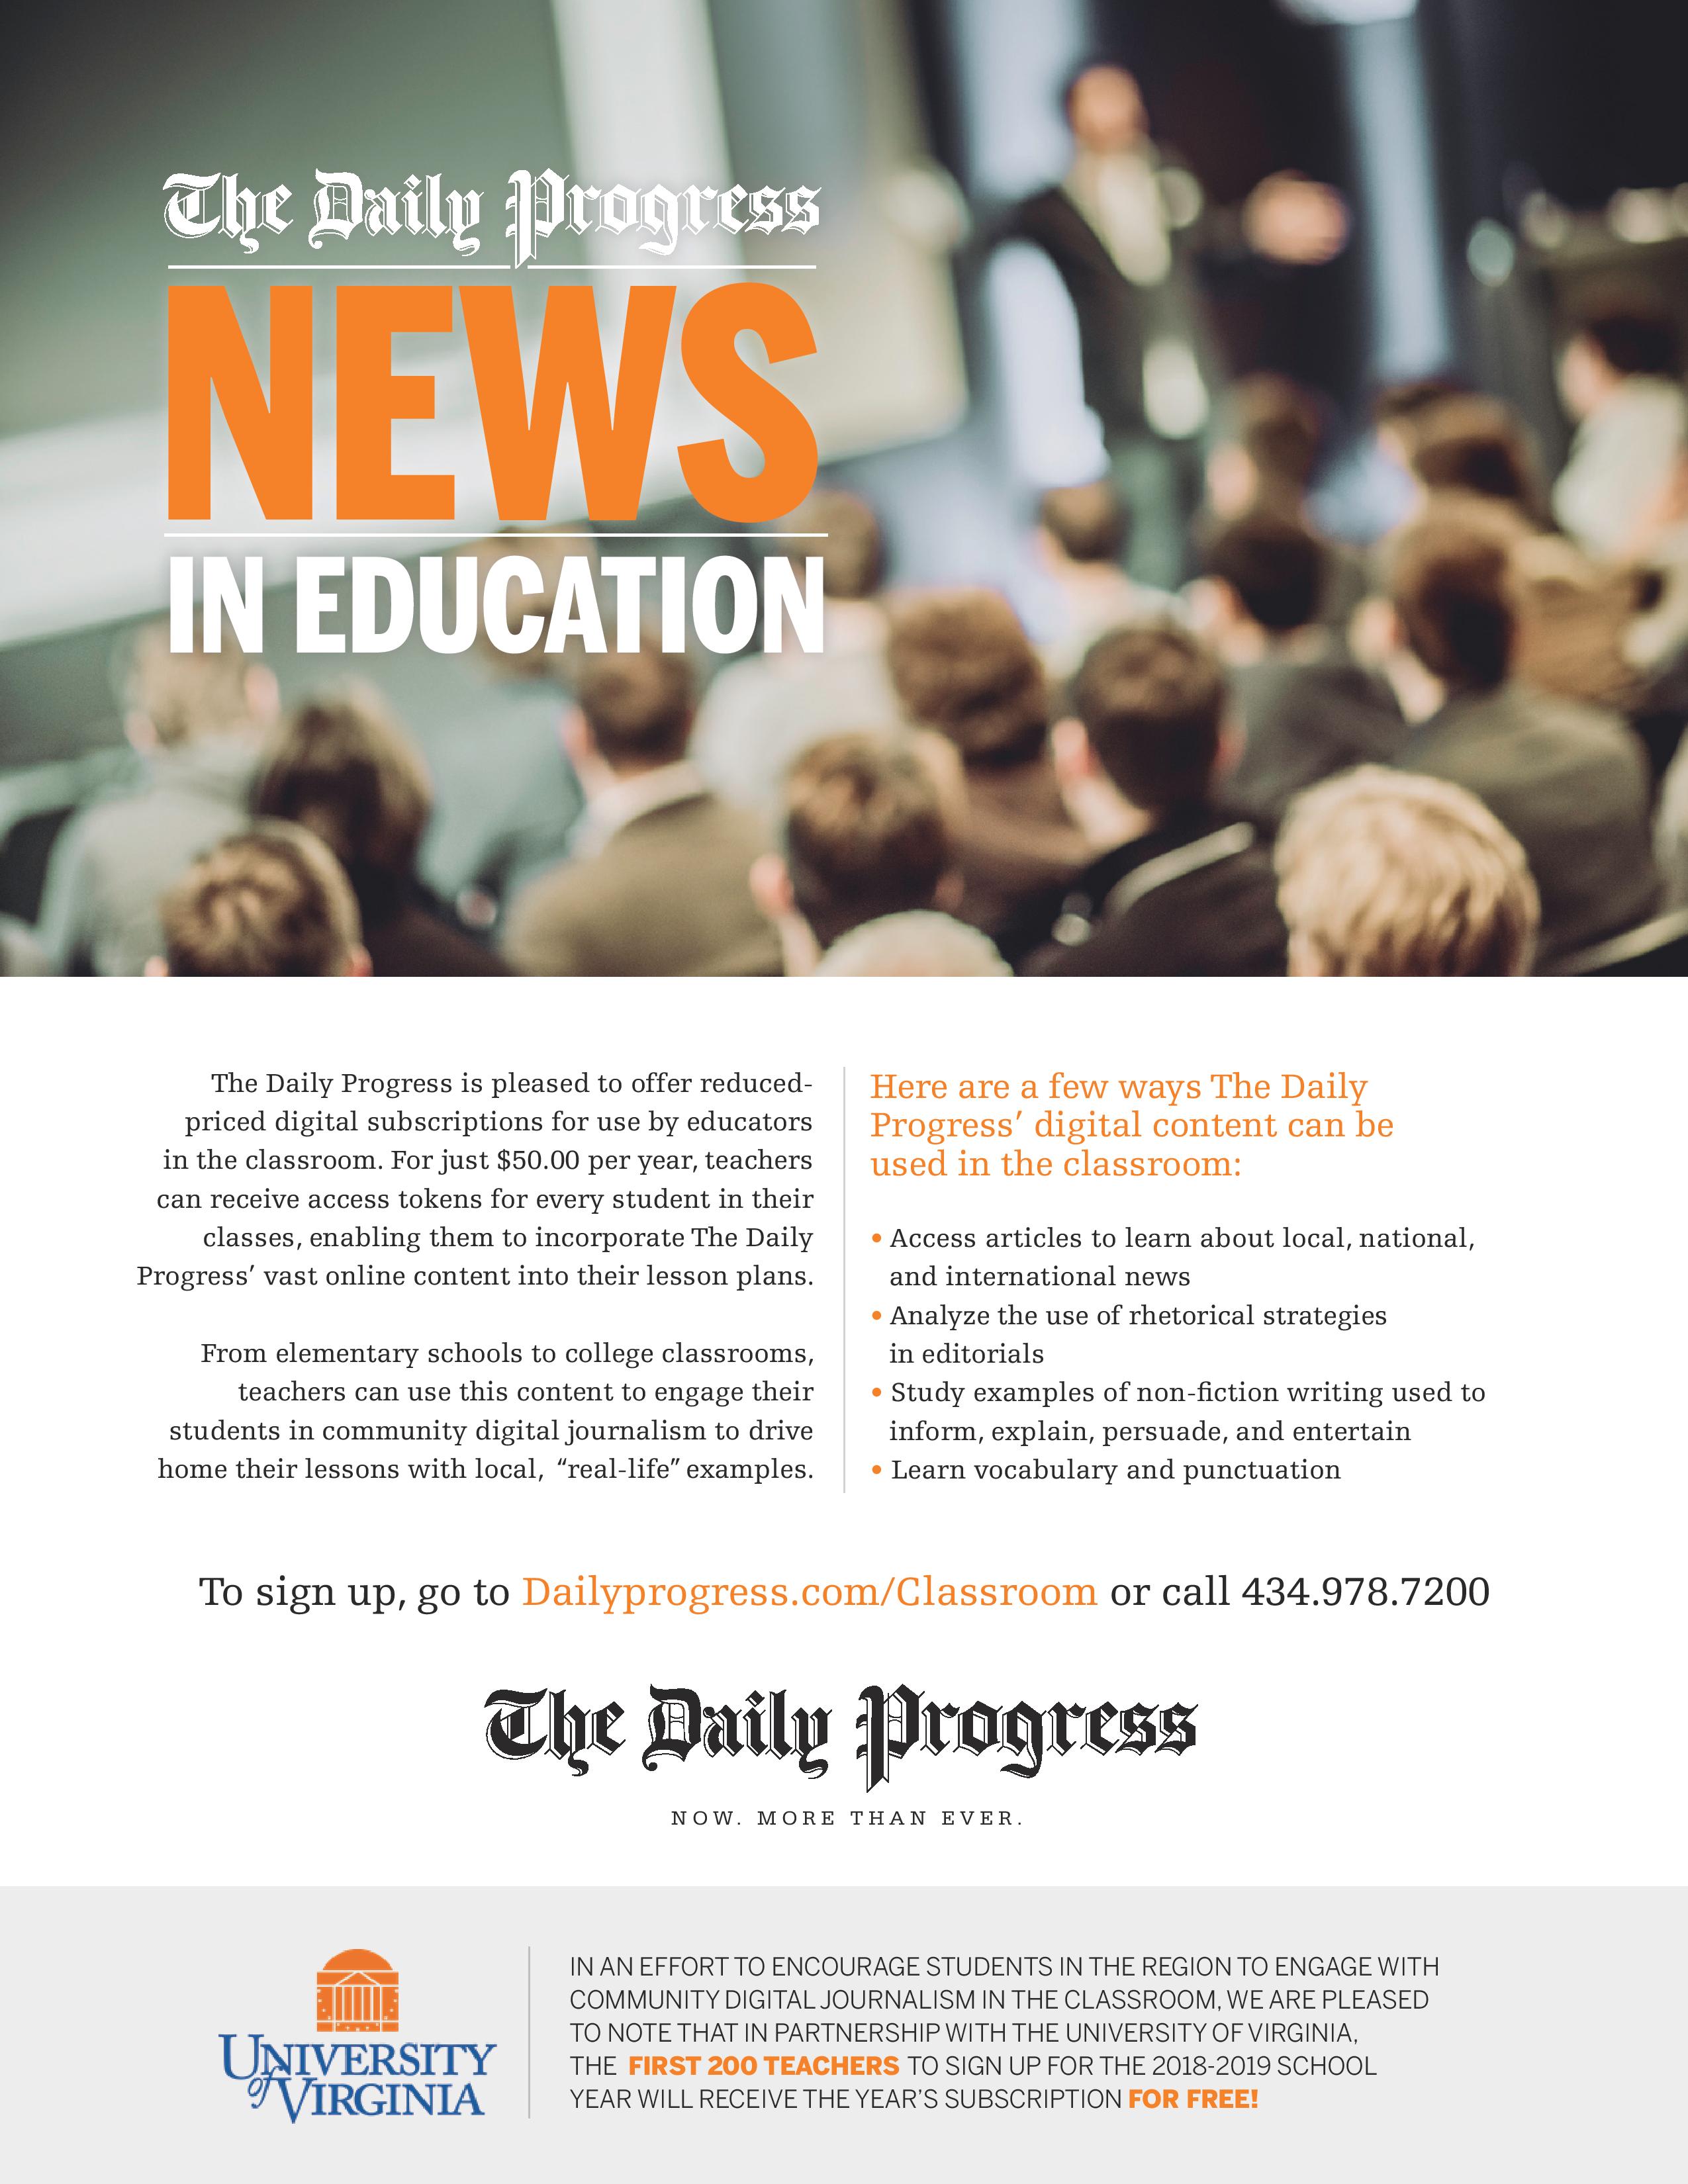 news articles related to education